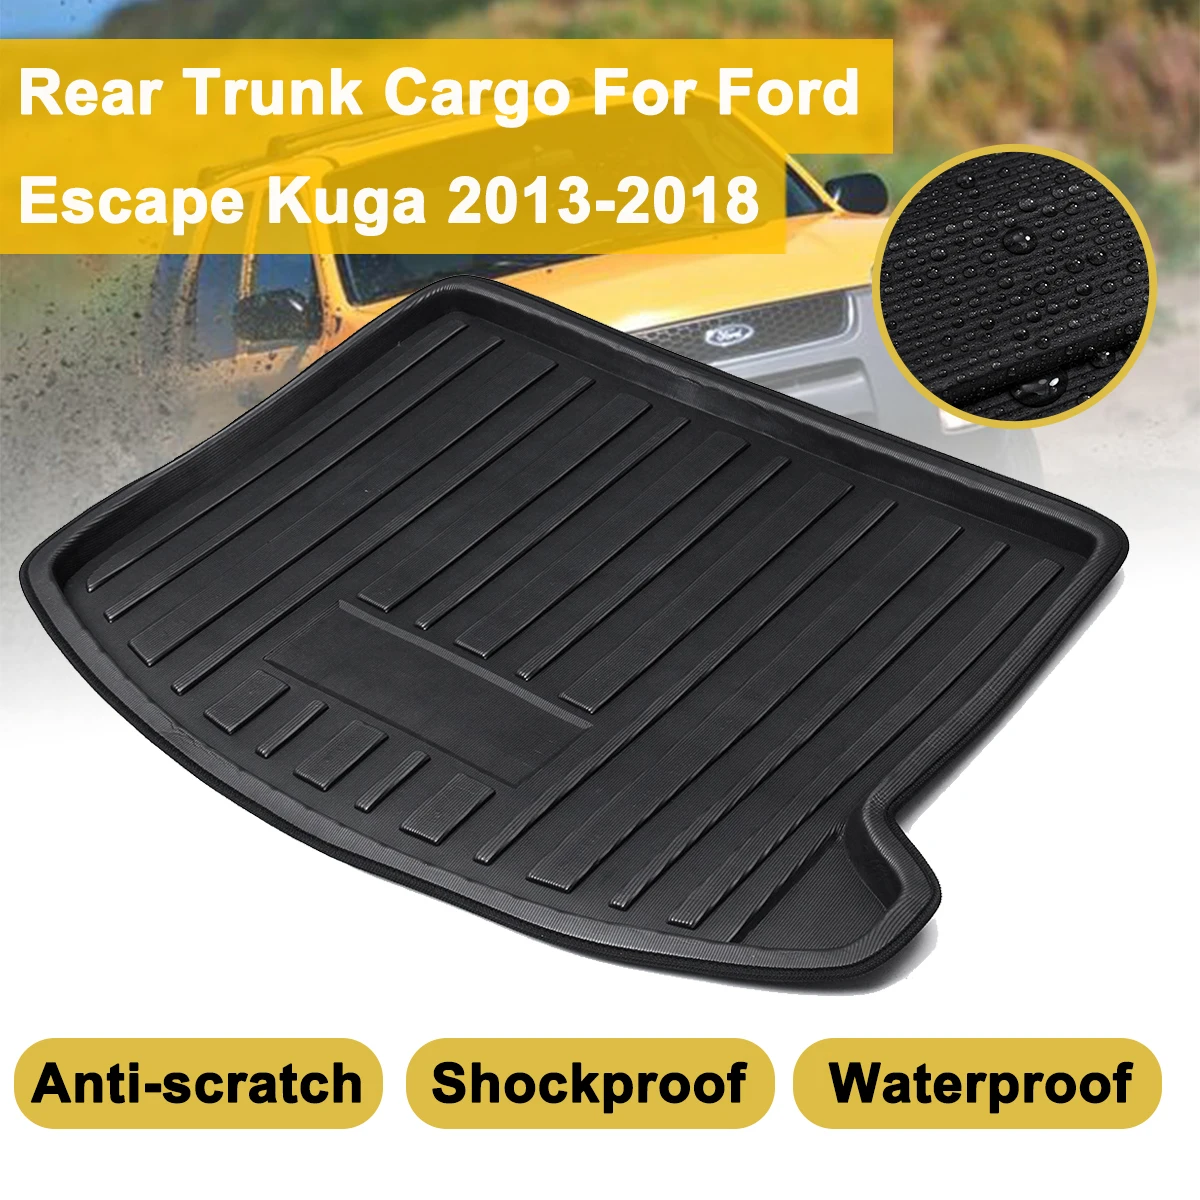 

Carpet Mud Rear Trunk Boot Mat Liner Cargo Floor Tray For Ford Escape Kuga Kick Protector Overlay 2013-2018 Shock Waterproof